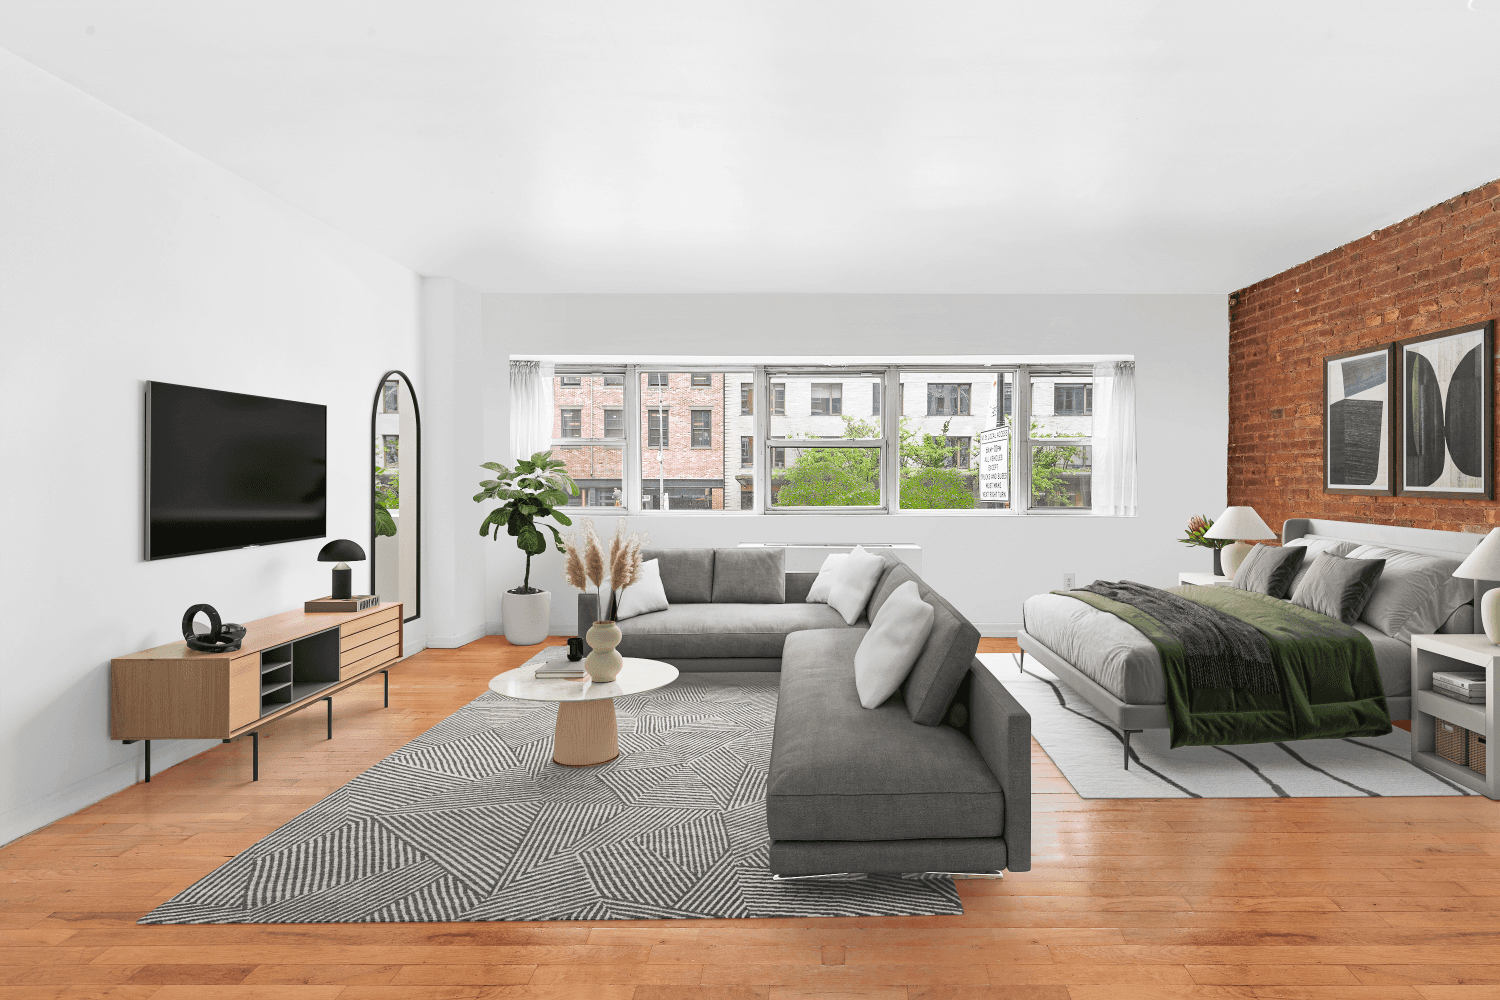 Sleek design, clean lines, and sun flooded, truly unique living opportunity awaits the next tenants of this bespoke studio apartment.